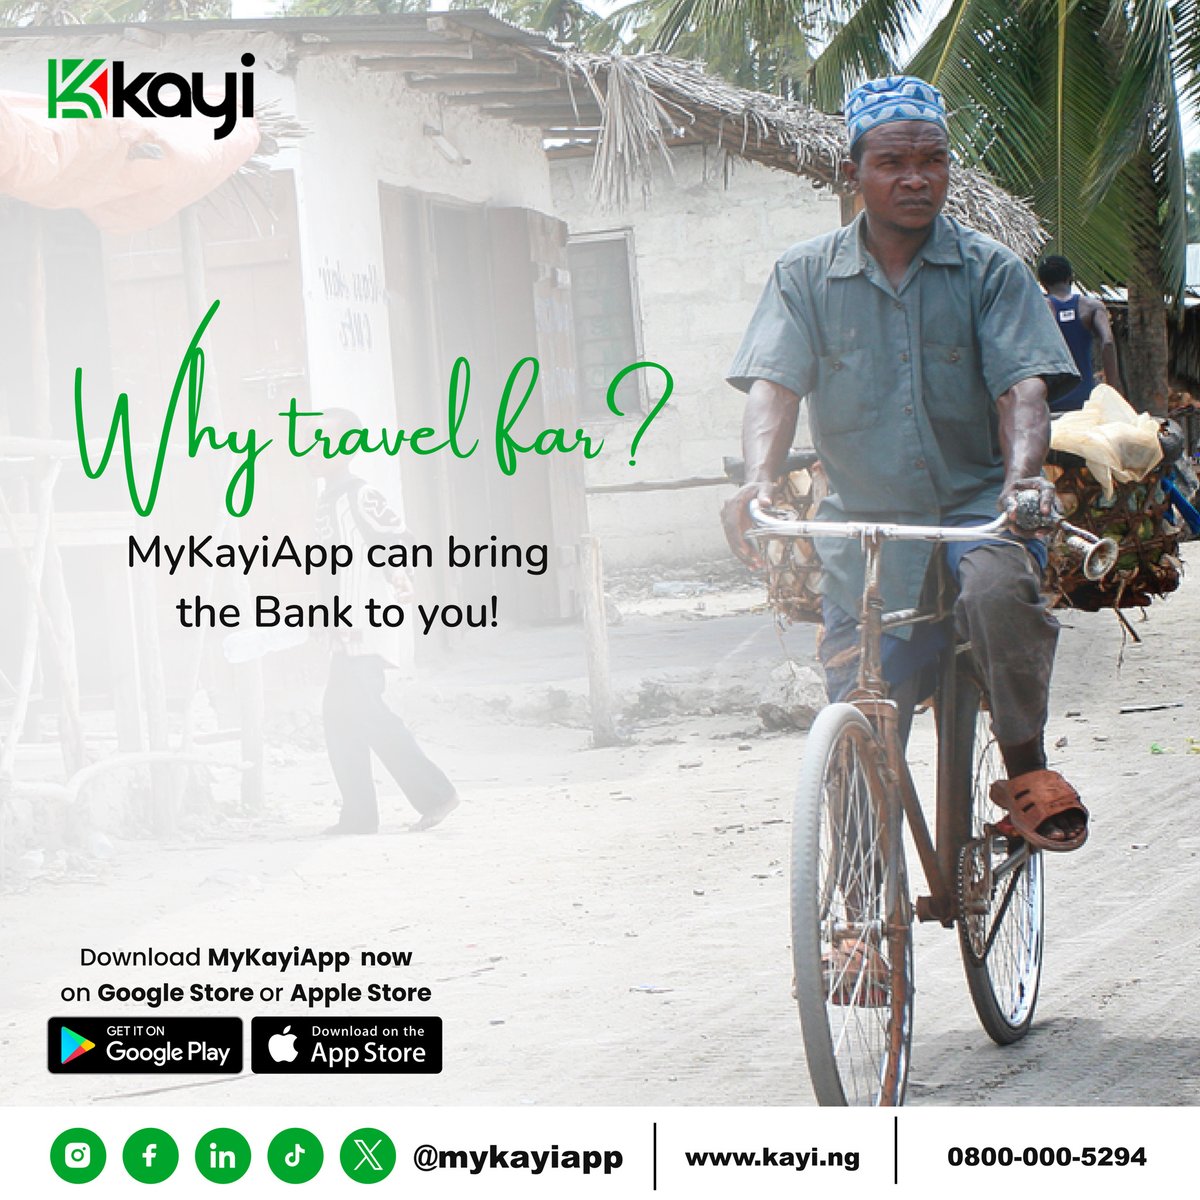 Living in rural areas just got easier! With Kayiapp, transferring money is as simple as a few taps on your phone, no matter where you are. Say goodbye to long journeys to the bank and hello to hassle-free transactions.

#MyKayiapp #RuralFinance #EasyTransfers
#DigitalBanking